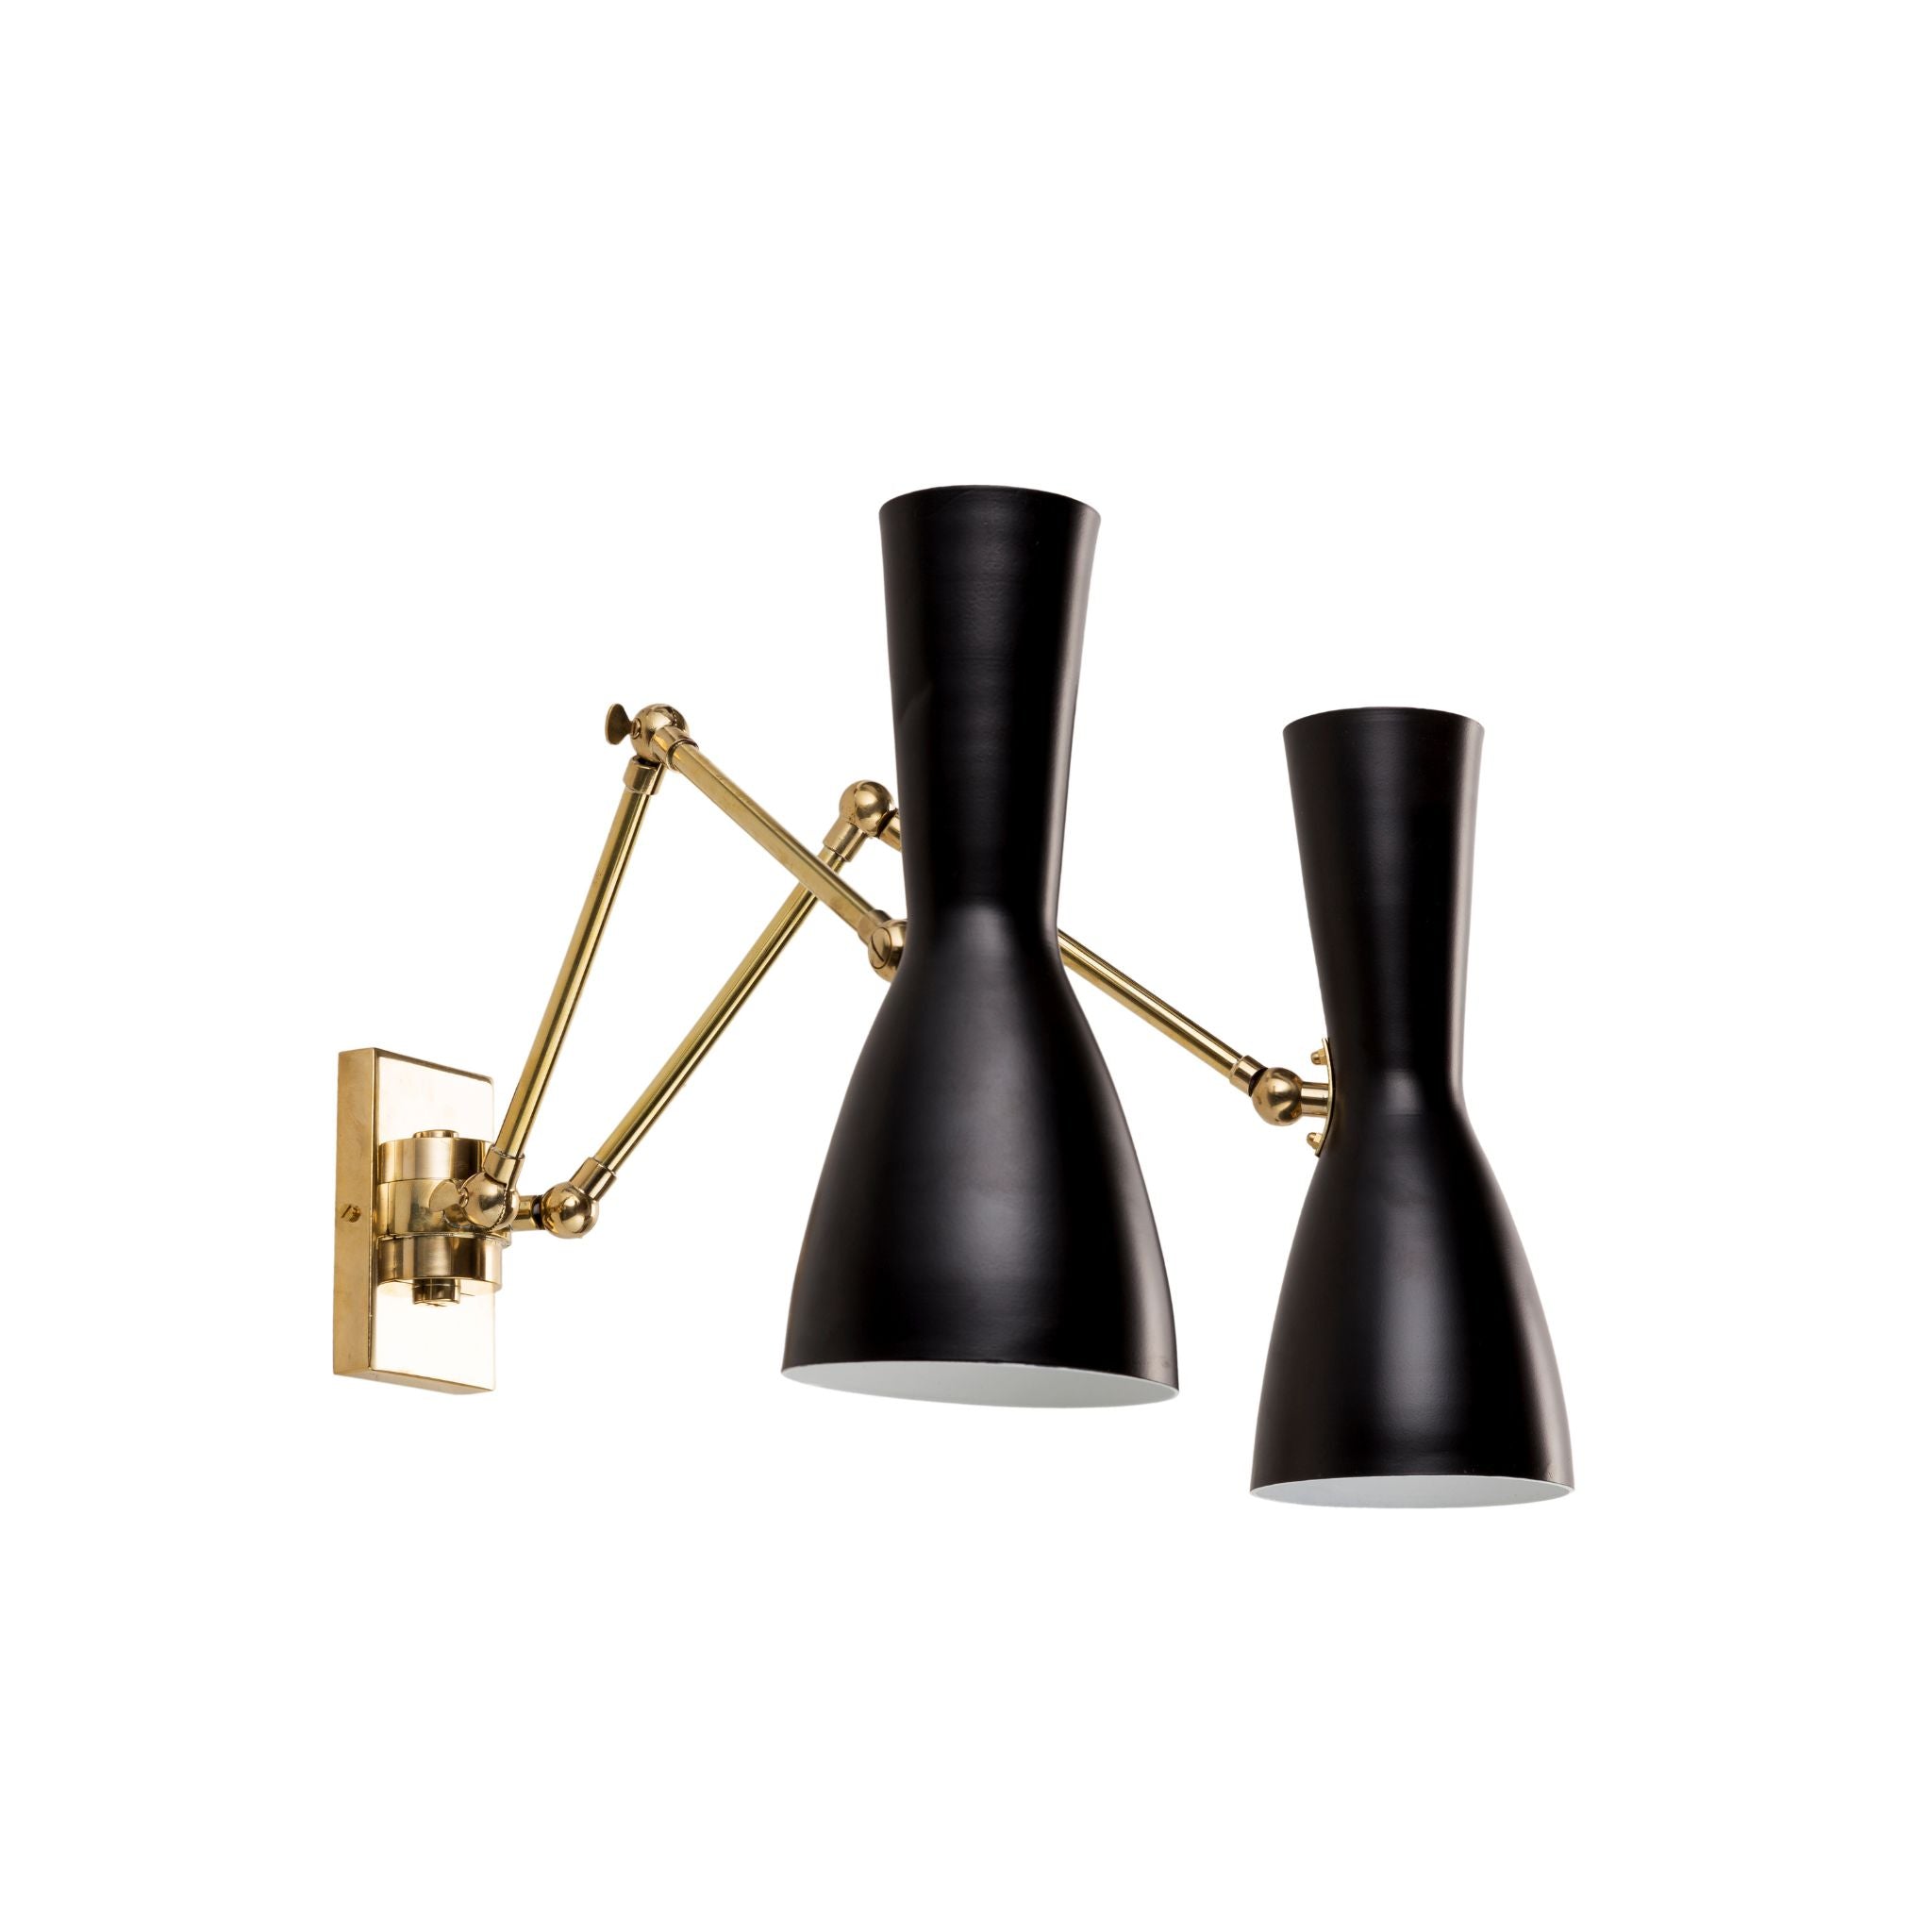 Wormhole jet black double joint arm brass wall light - ilbronzetto